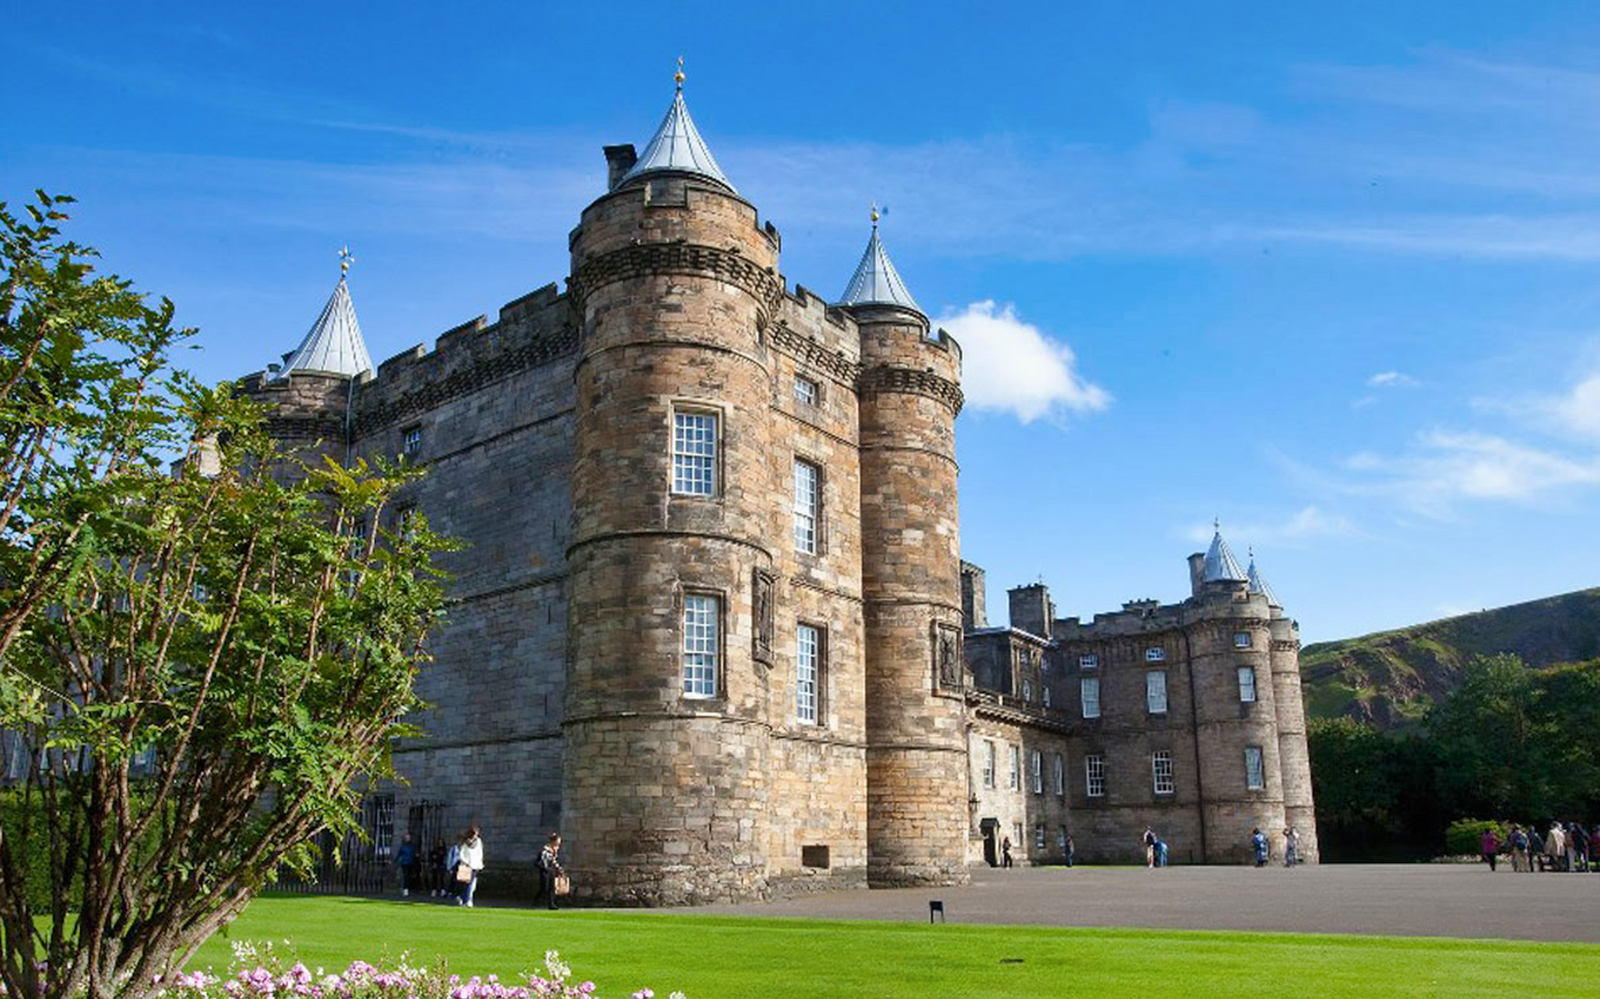 Image of Treasures of the Old Town with Palace of Holyroodhouse